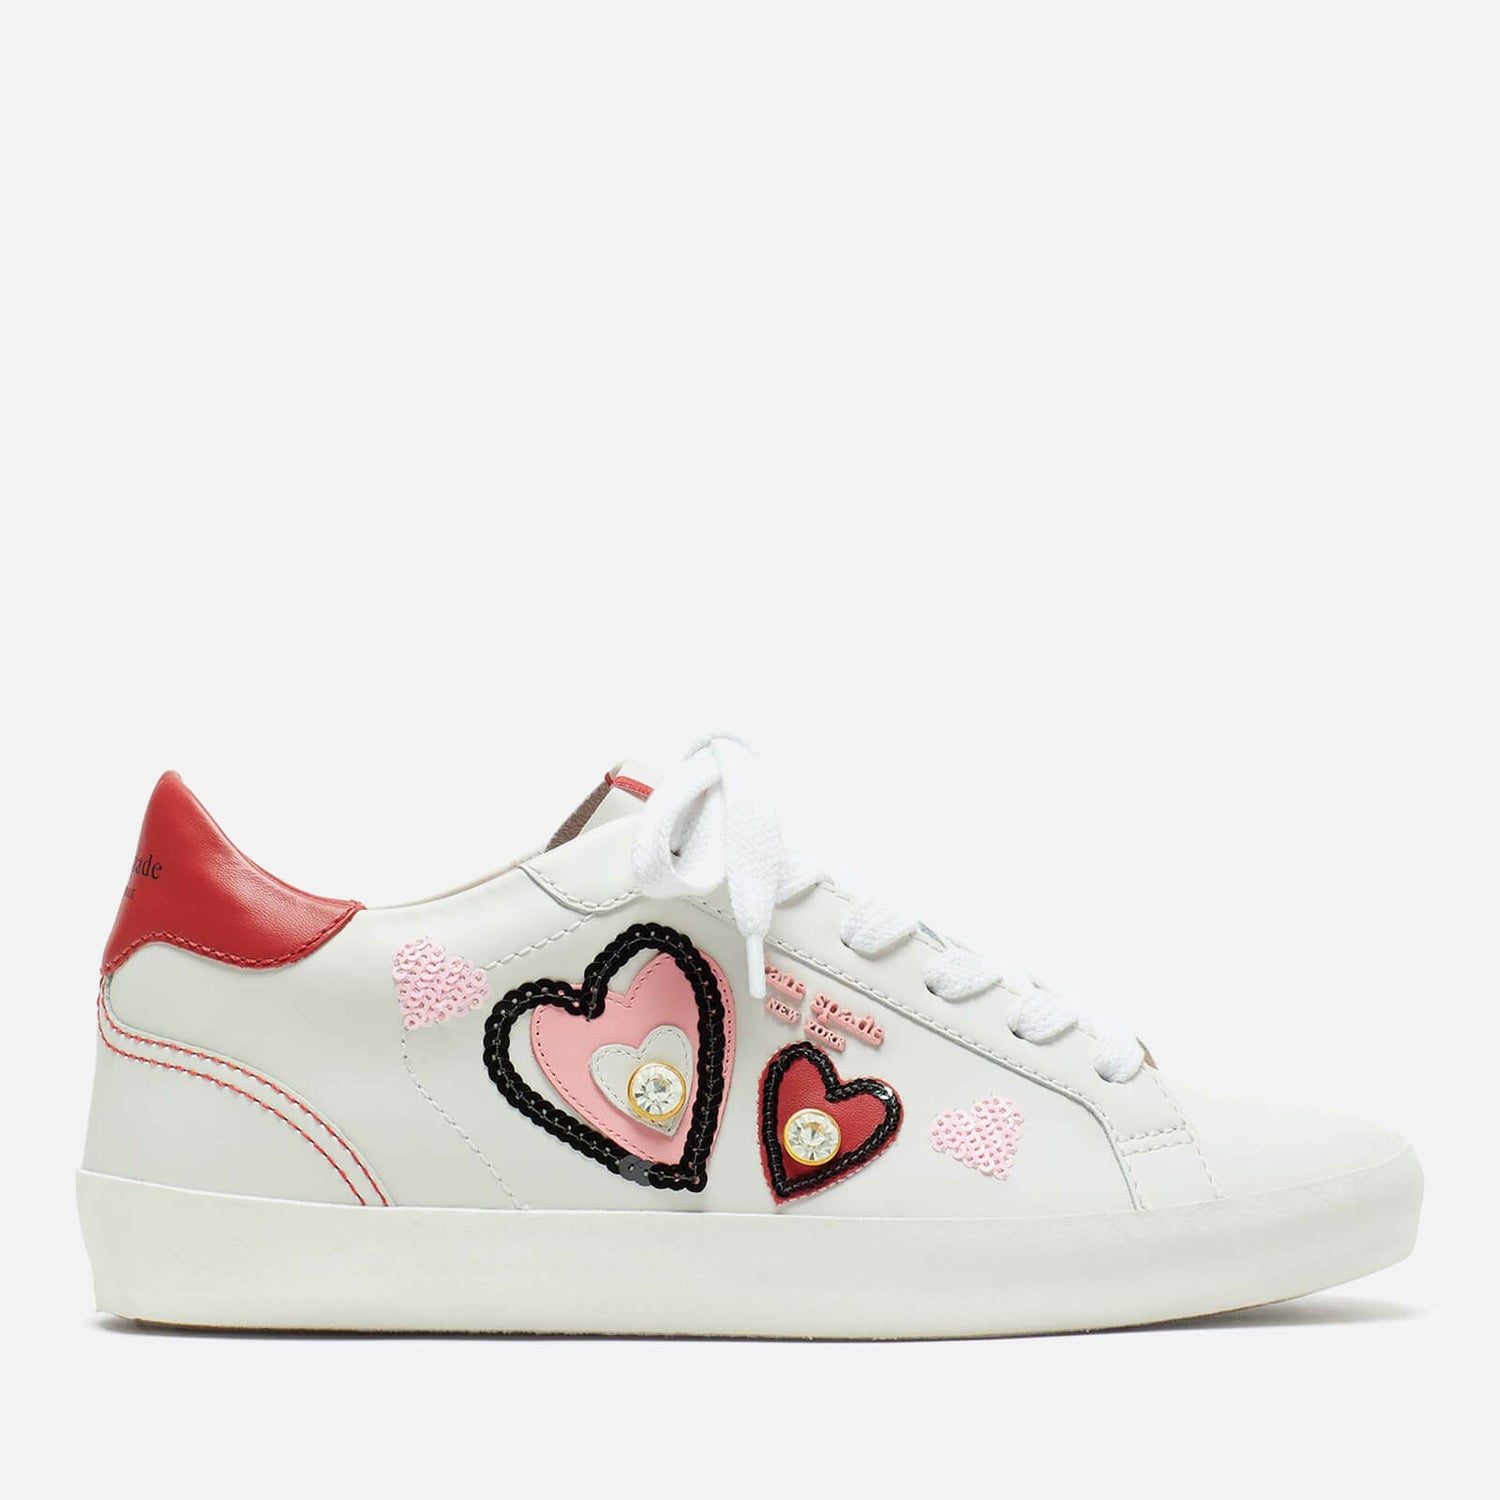 Kate Spade New York Ace Hearts Embellished Leather Trainers | TheHut.com